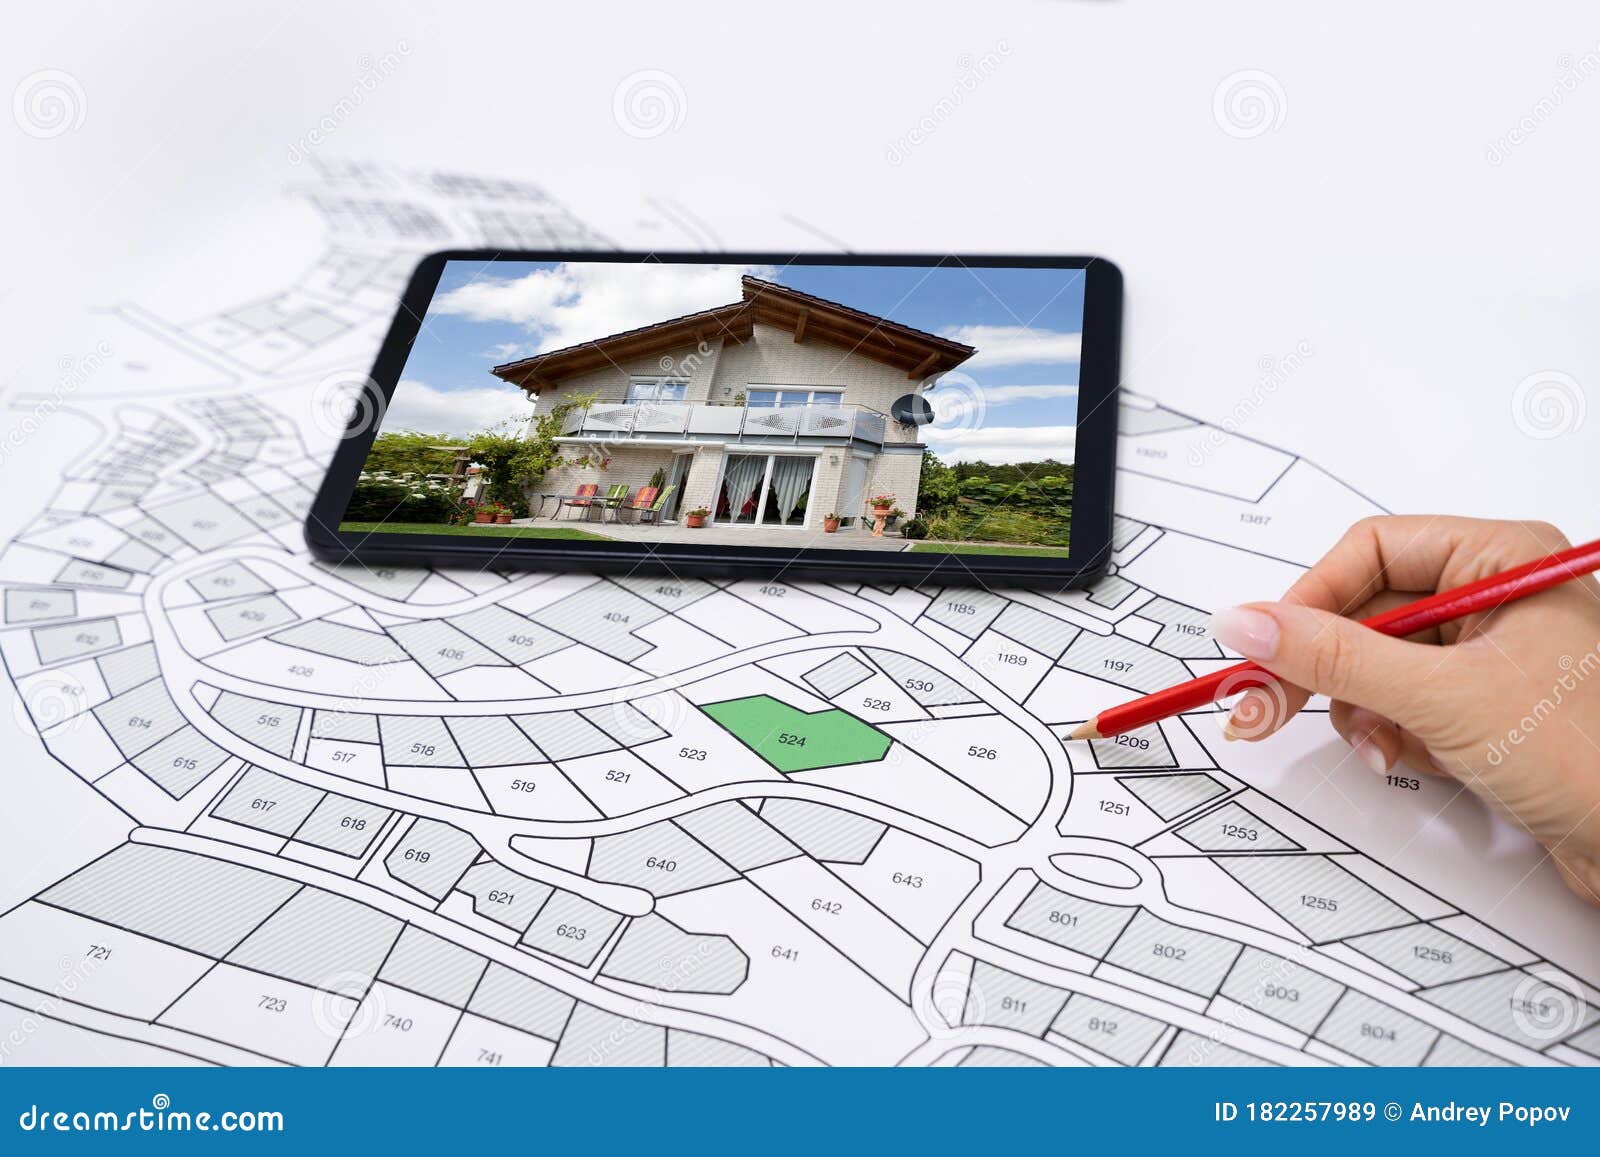 hand holding pencil over cadastre map new tablet